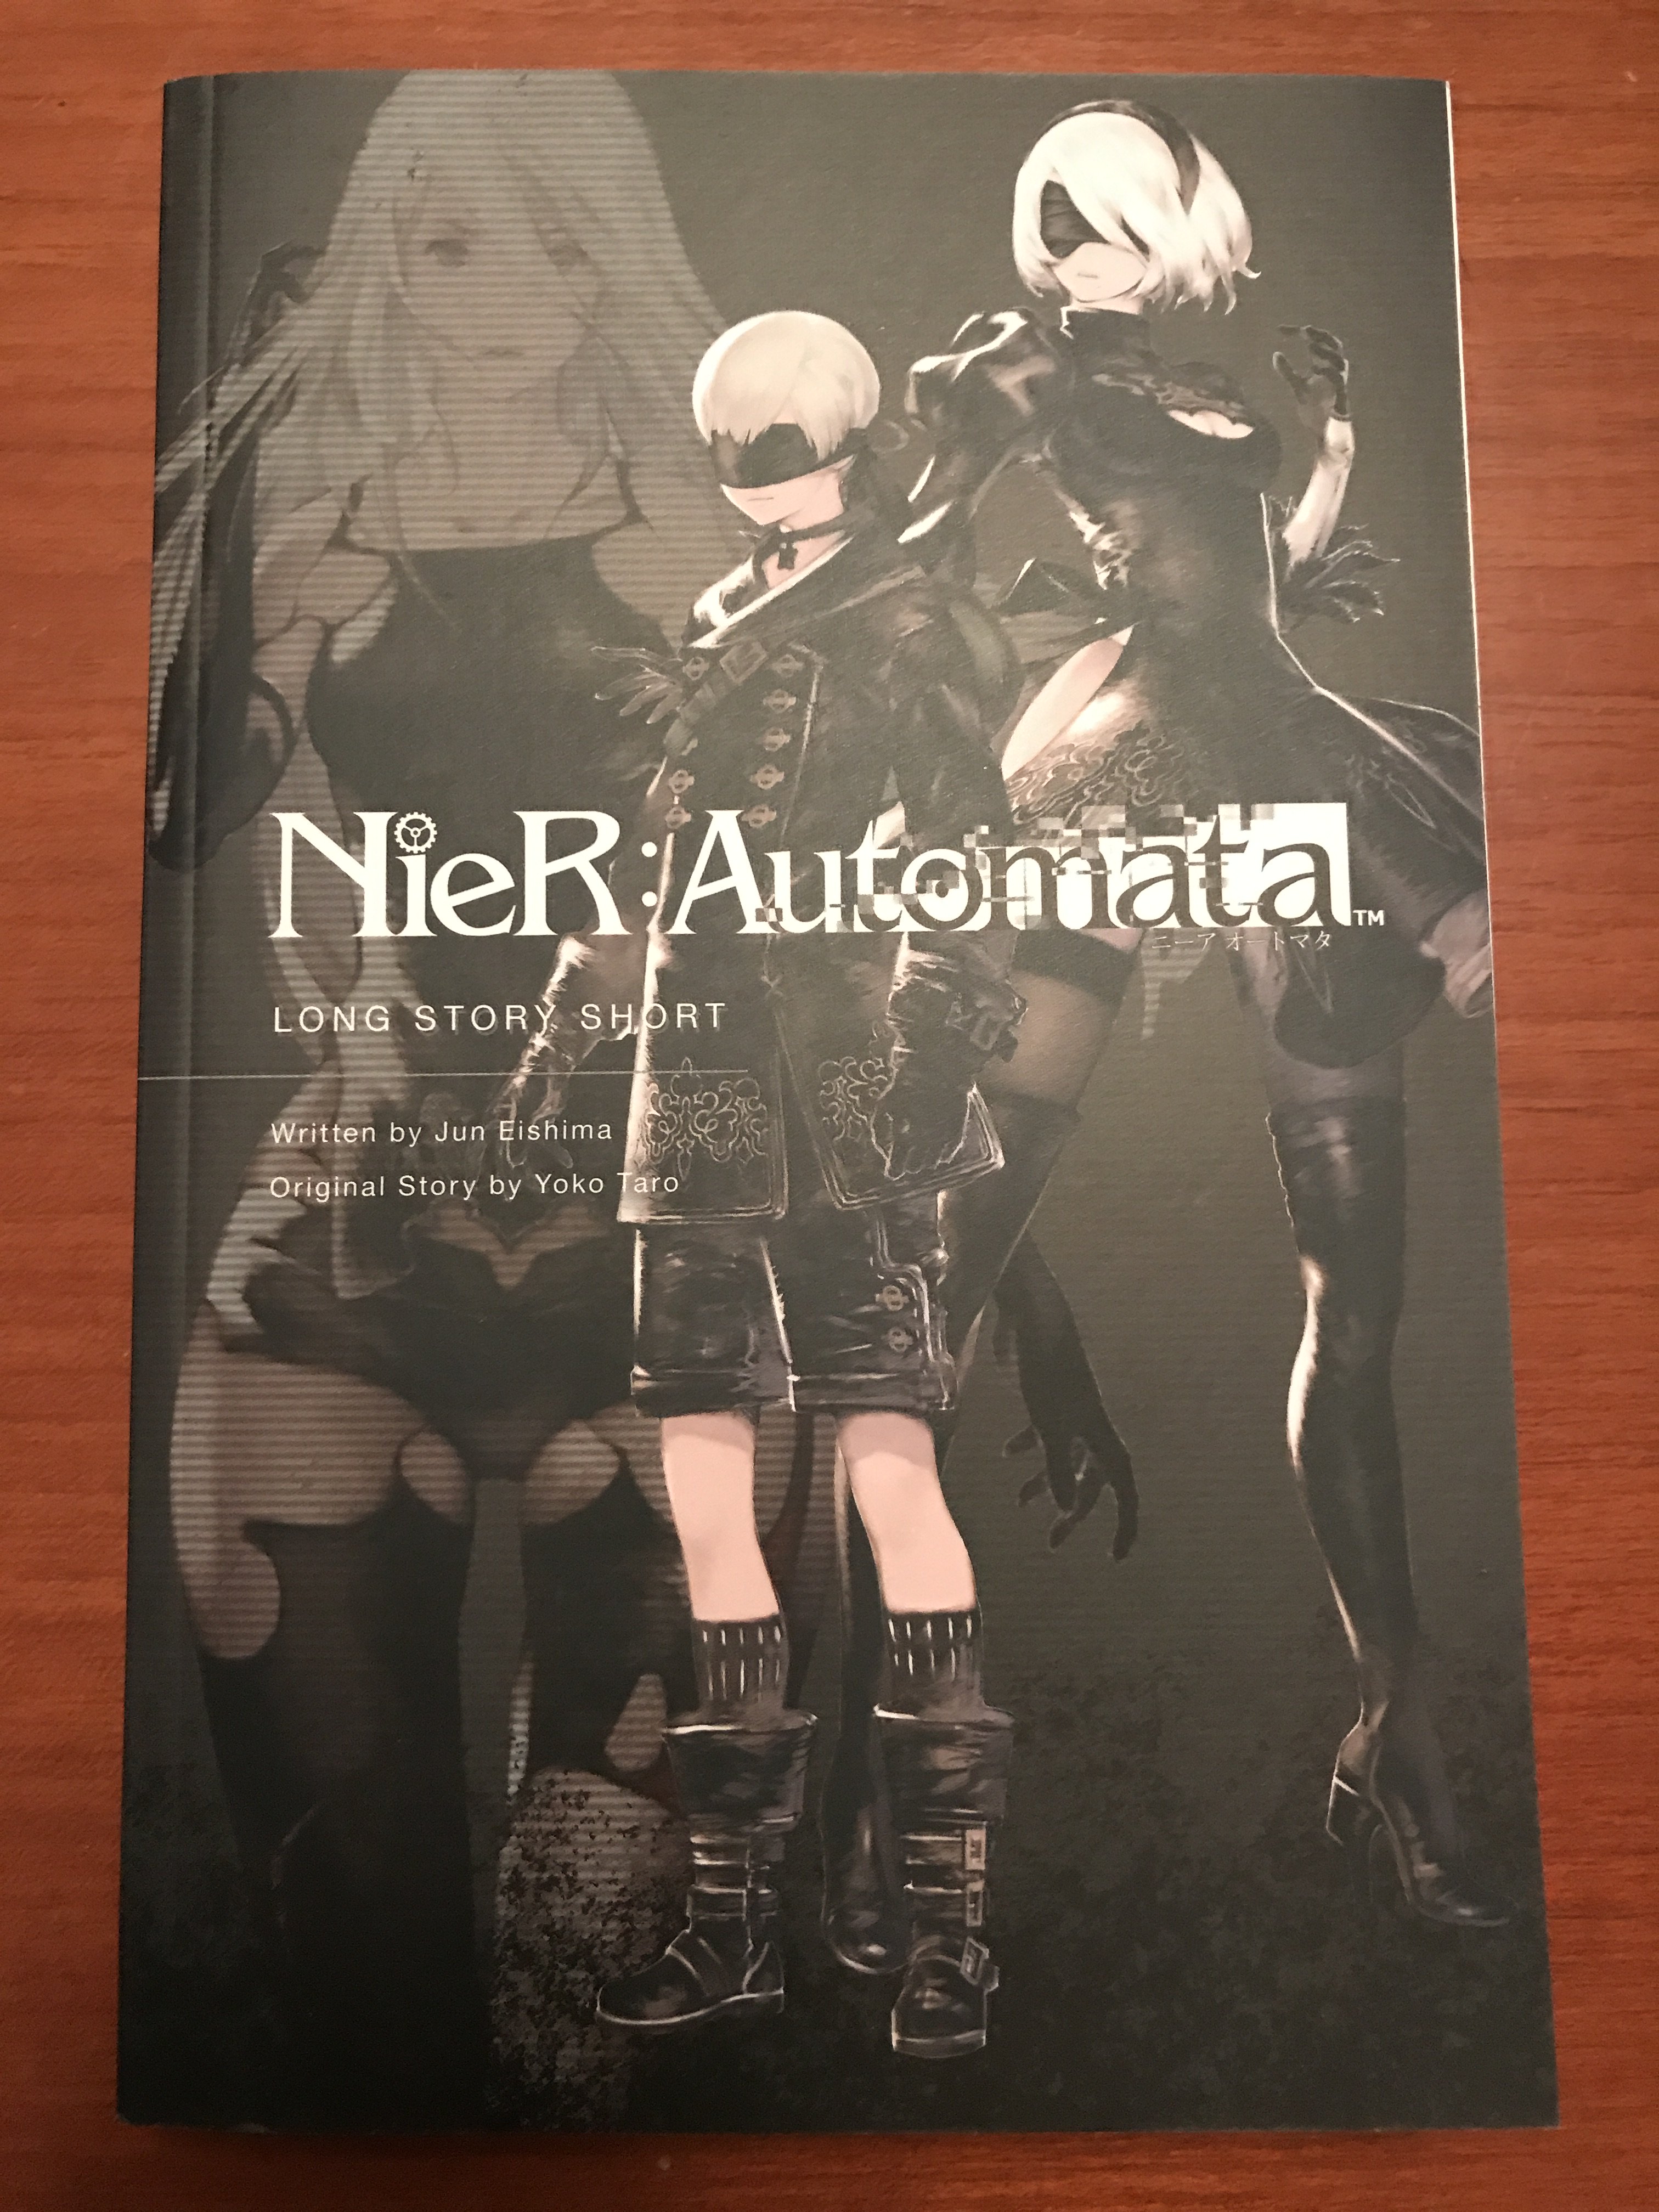 Lbabinz Evening Delivery Nier Automata Long Story Short Book Arrived Looks Amazing Little Illustrations Scattered Throughout Currently 13 31 Off Amazon T Co Lbpnicpn8q T Co Njj6rdjptx Twitter